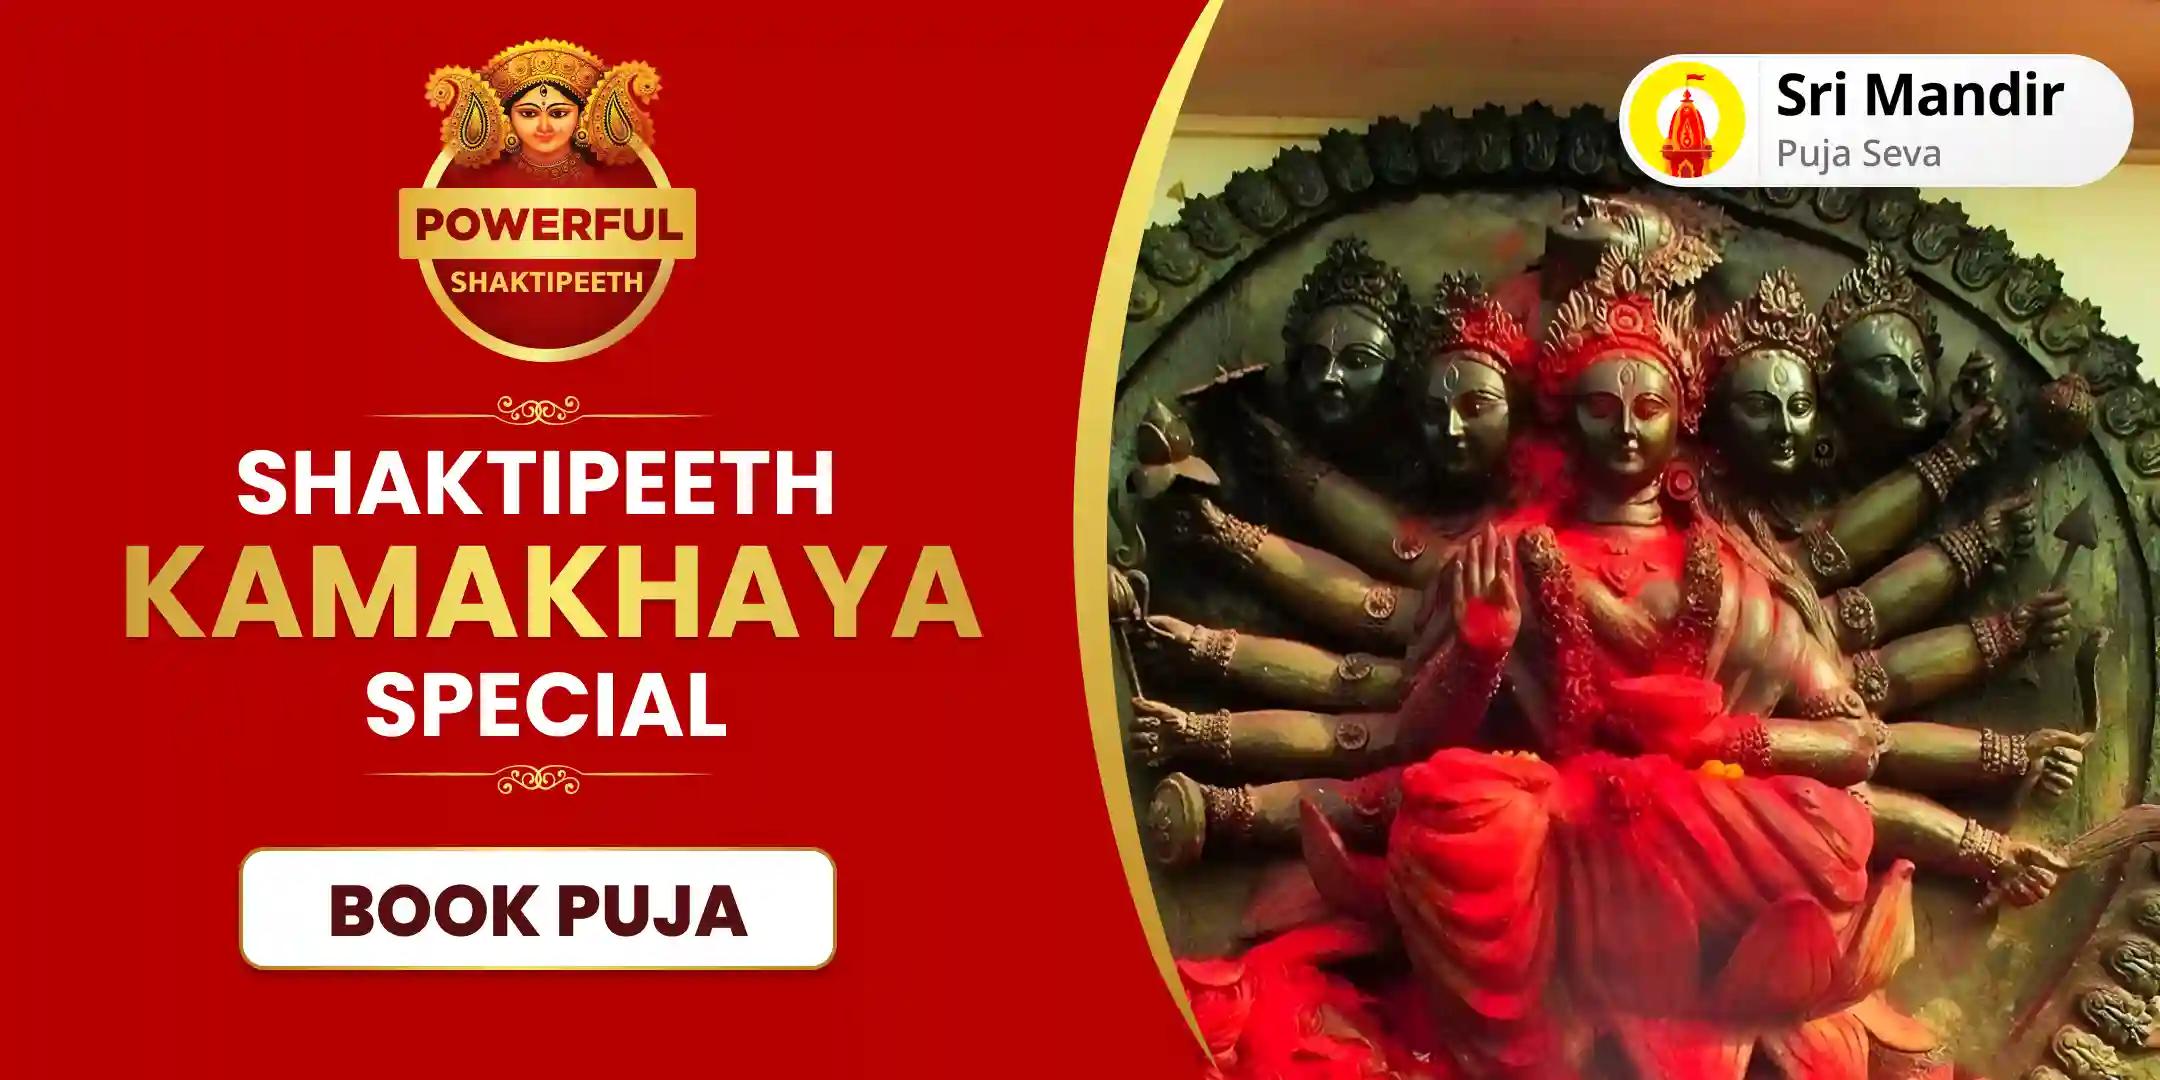 Buddh Purnima Powerful Shaktipeeth Special 10 Mahavidya Puja For Mental and Physical Well-being